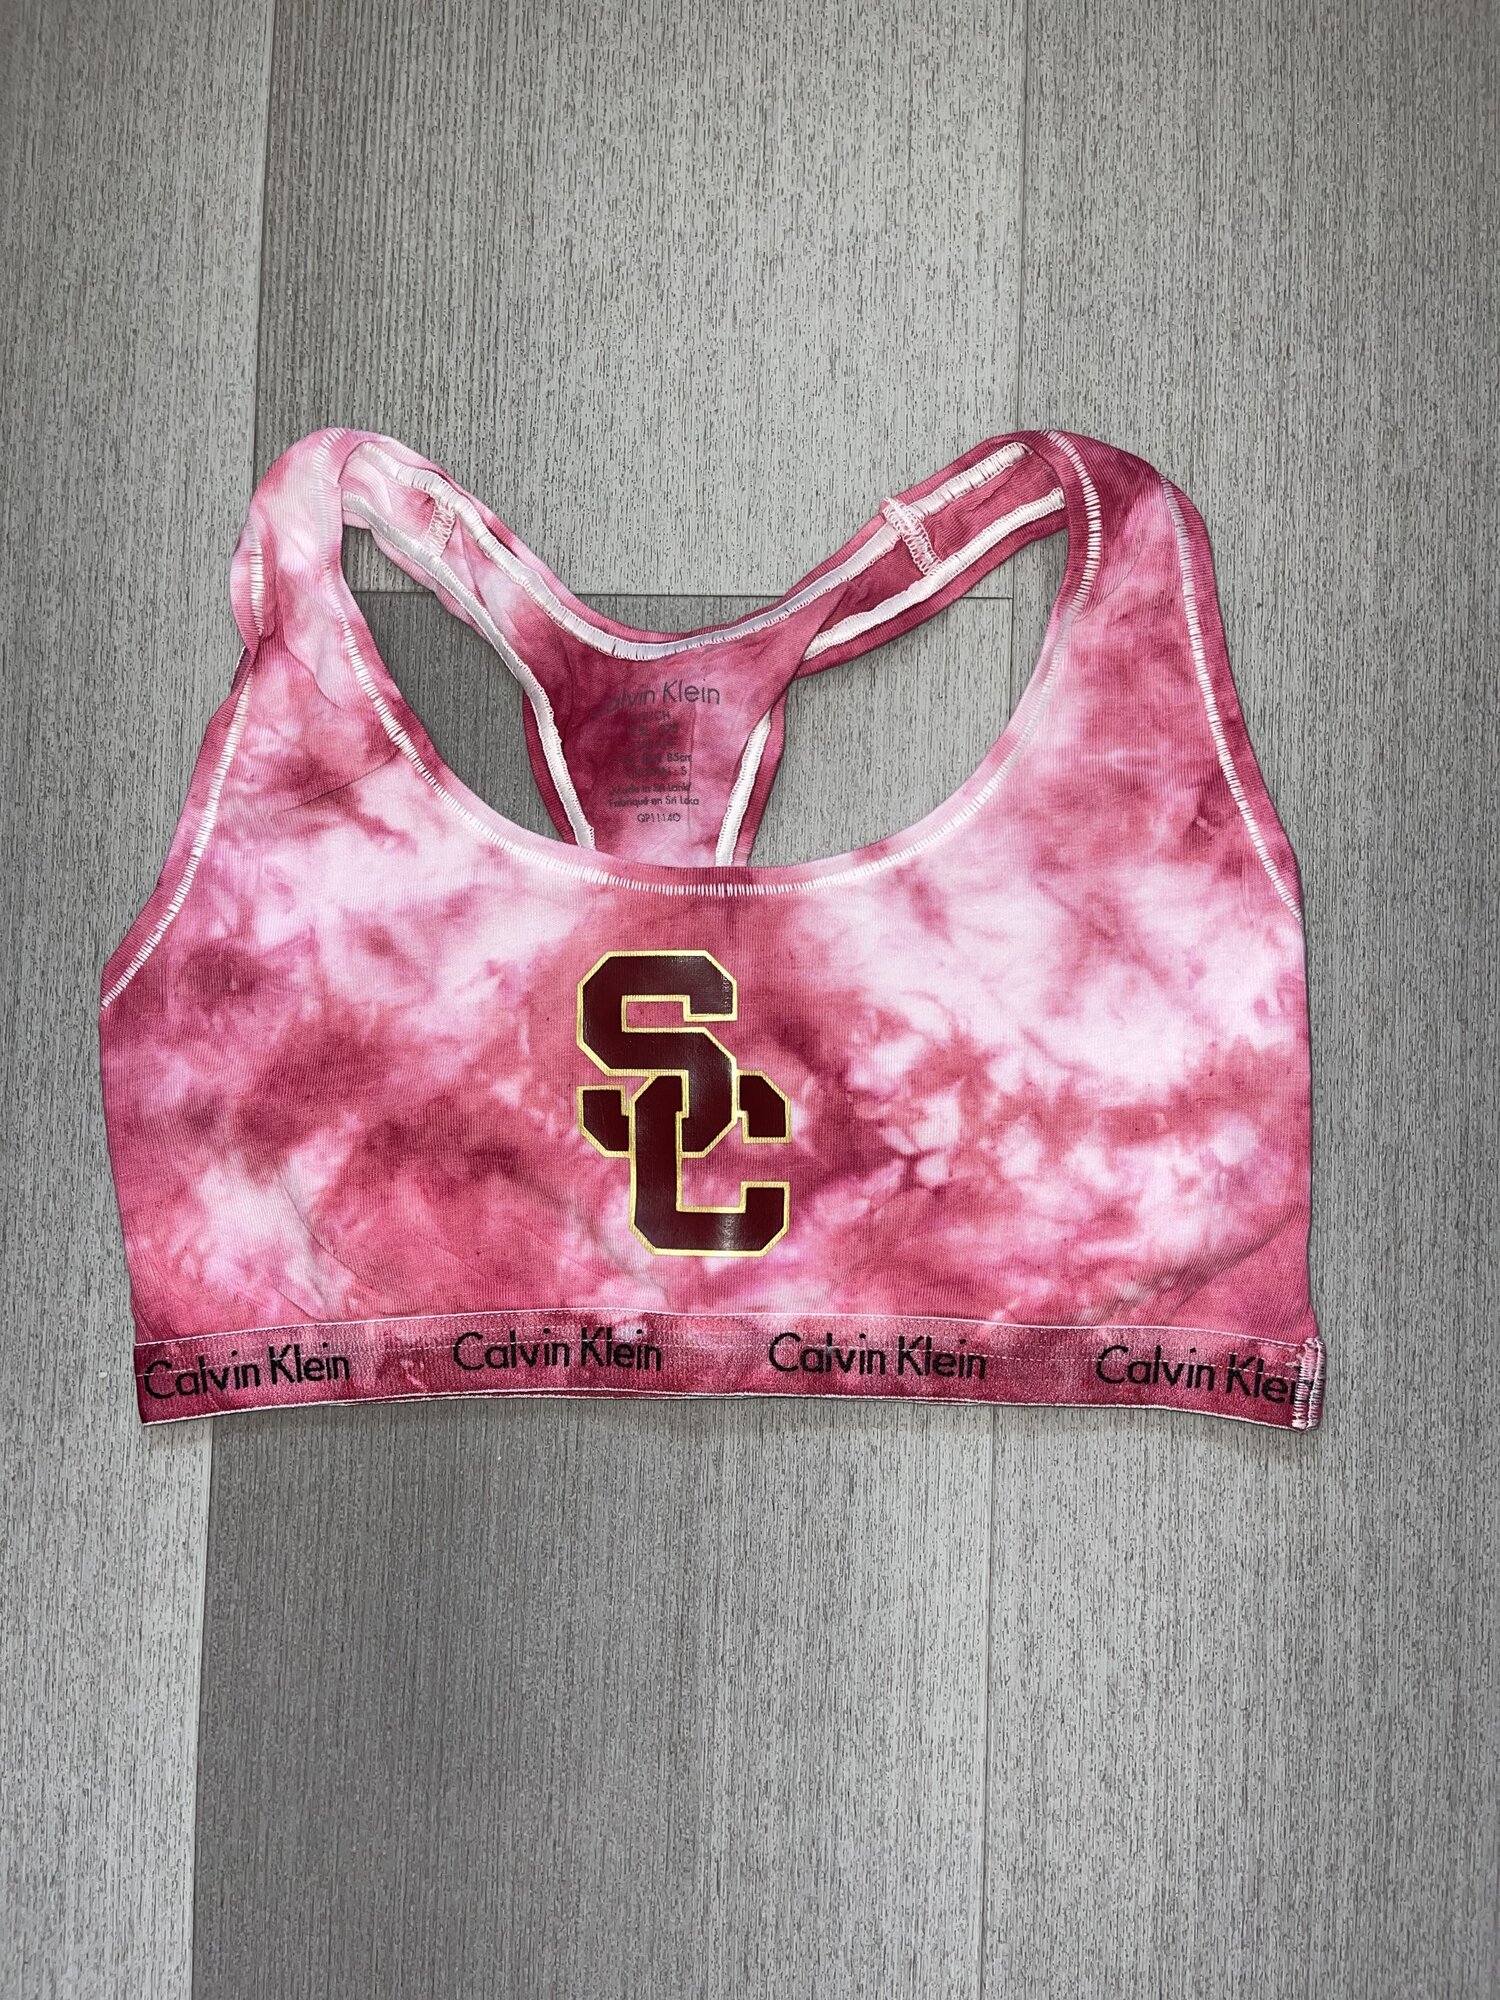 Maroon Tie Dye Calvin Klein bra for the University of Southern California ( USC) -Sample Size Small — 